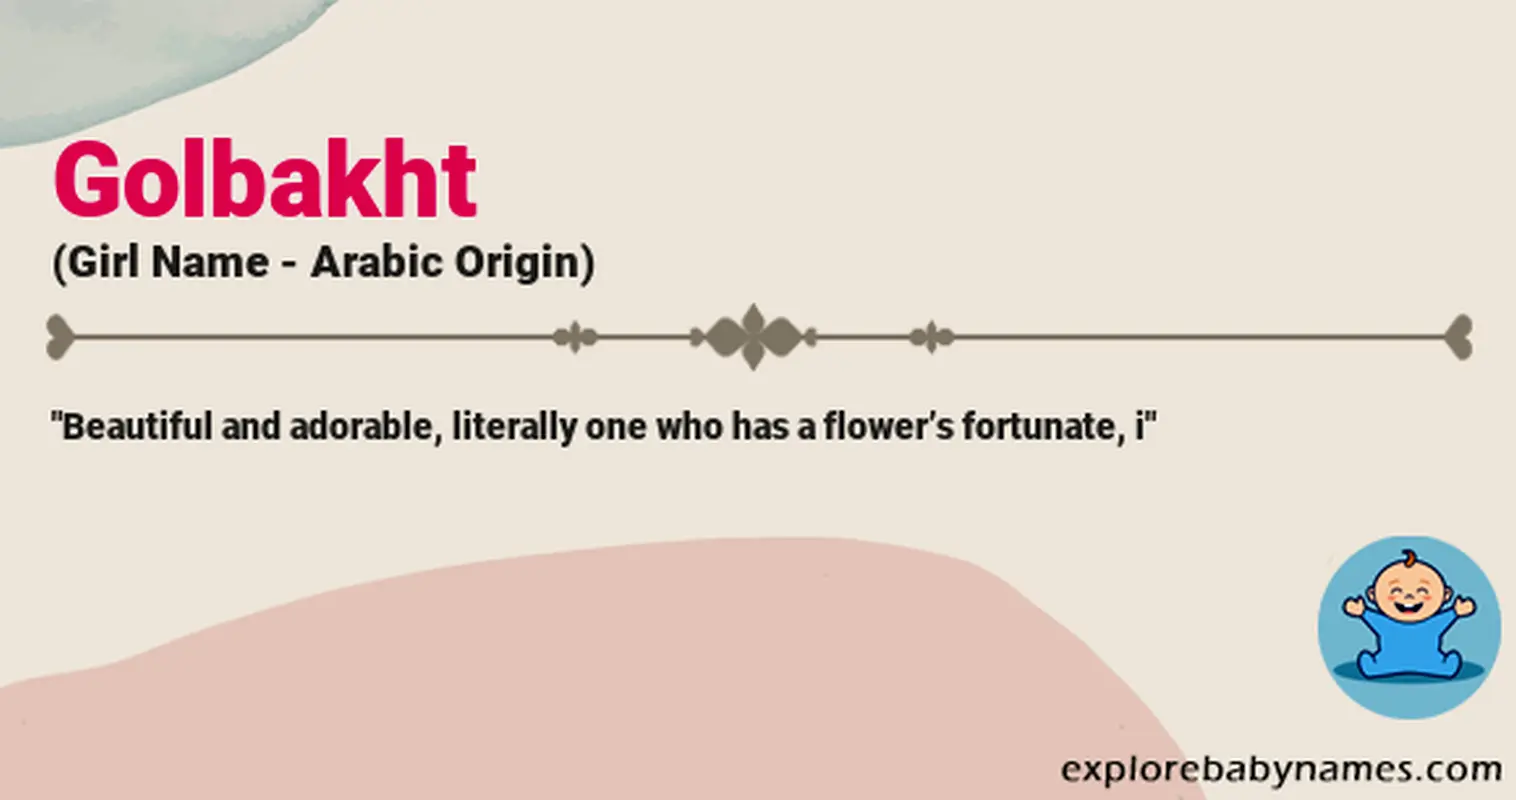 Meaning of Golbakht